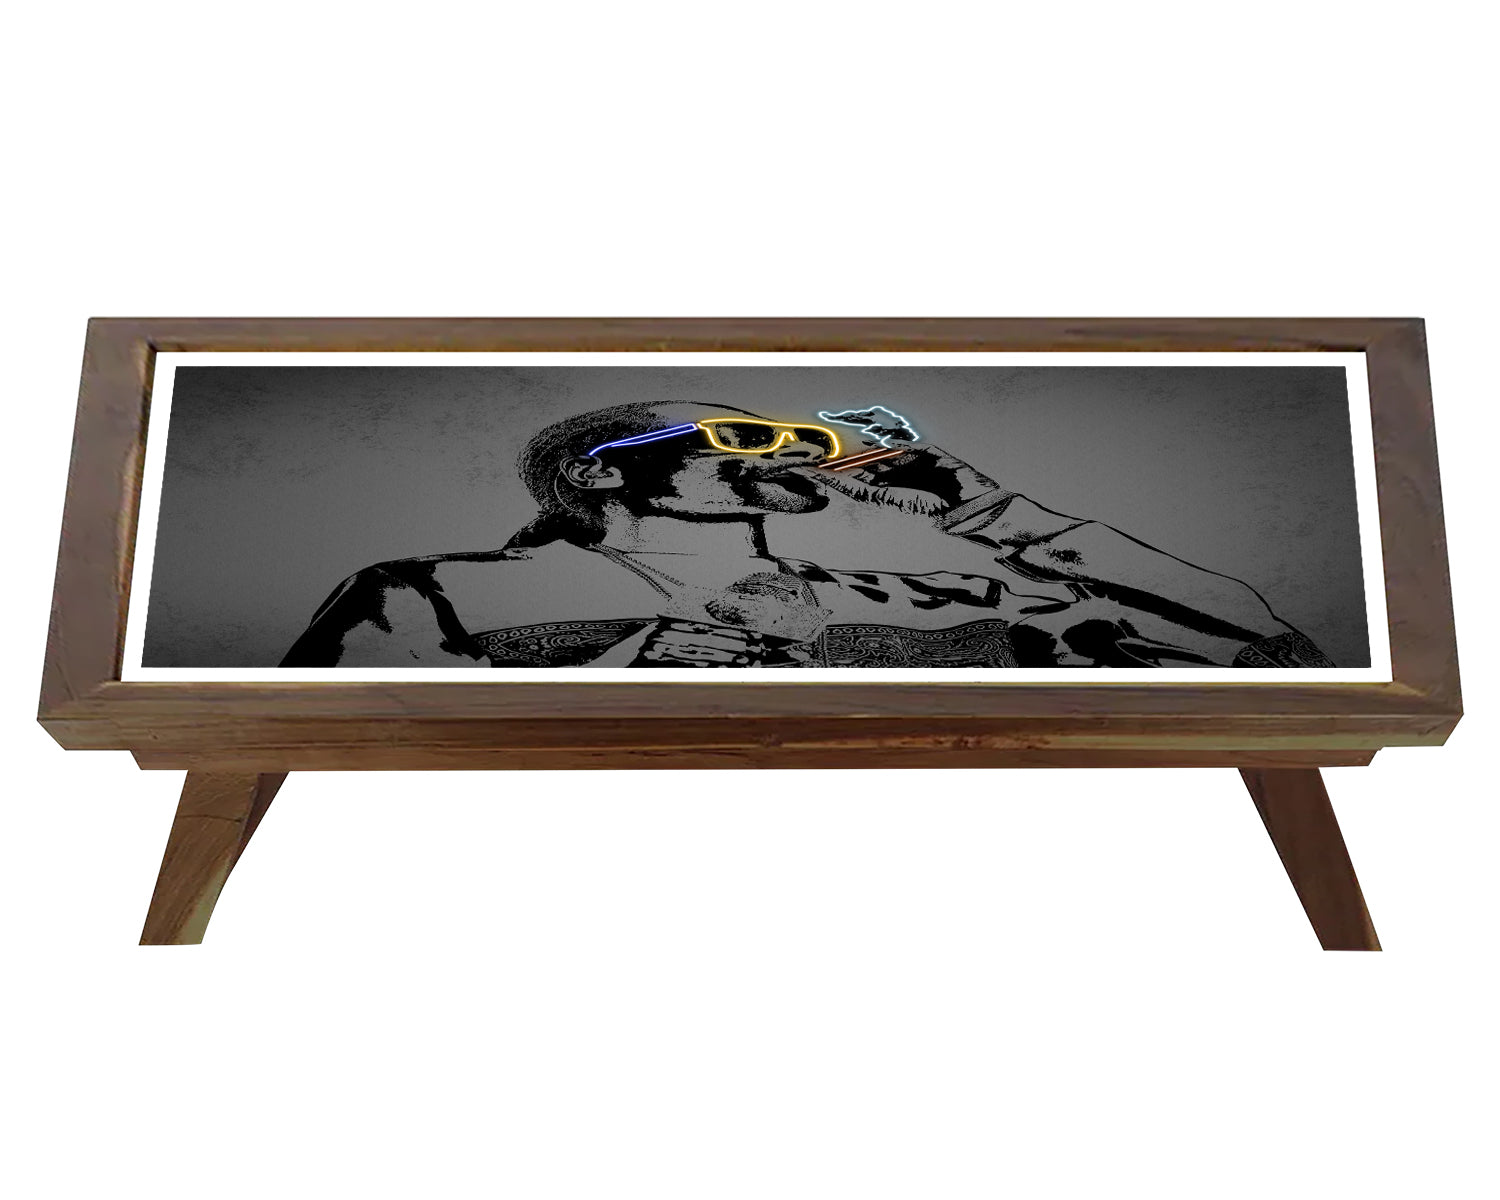 Snoop Dogg Neon Effect Coffee and Laptop Table 